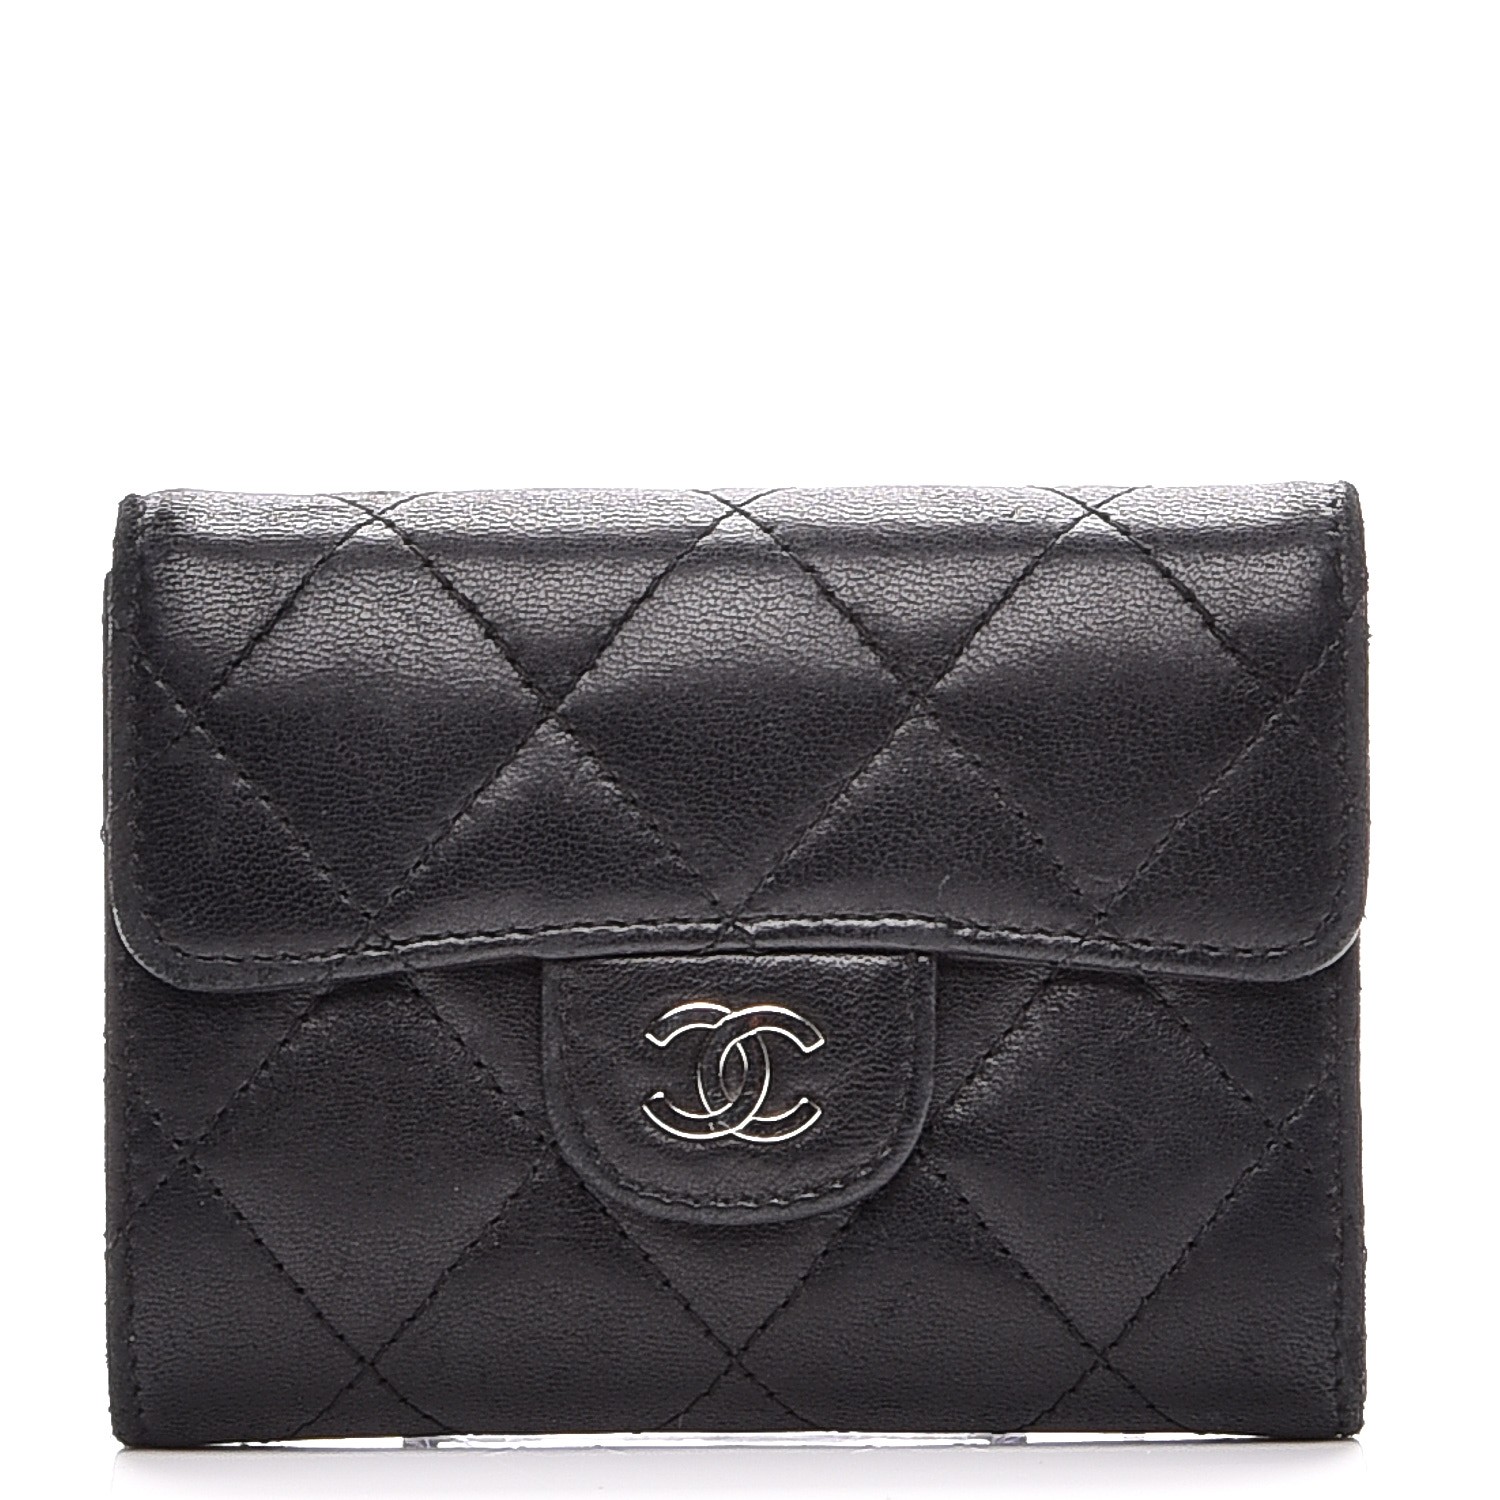 CHANEL Lambskin Quilted Flap Card Holder Wallet Black 227452